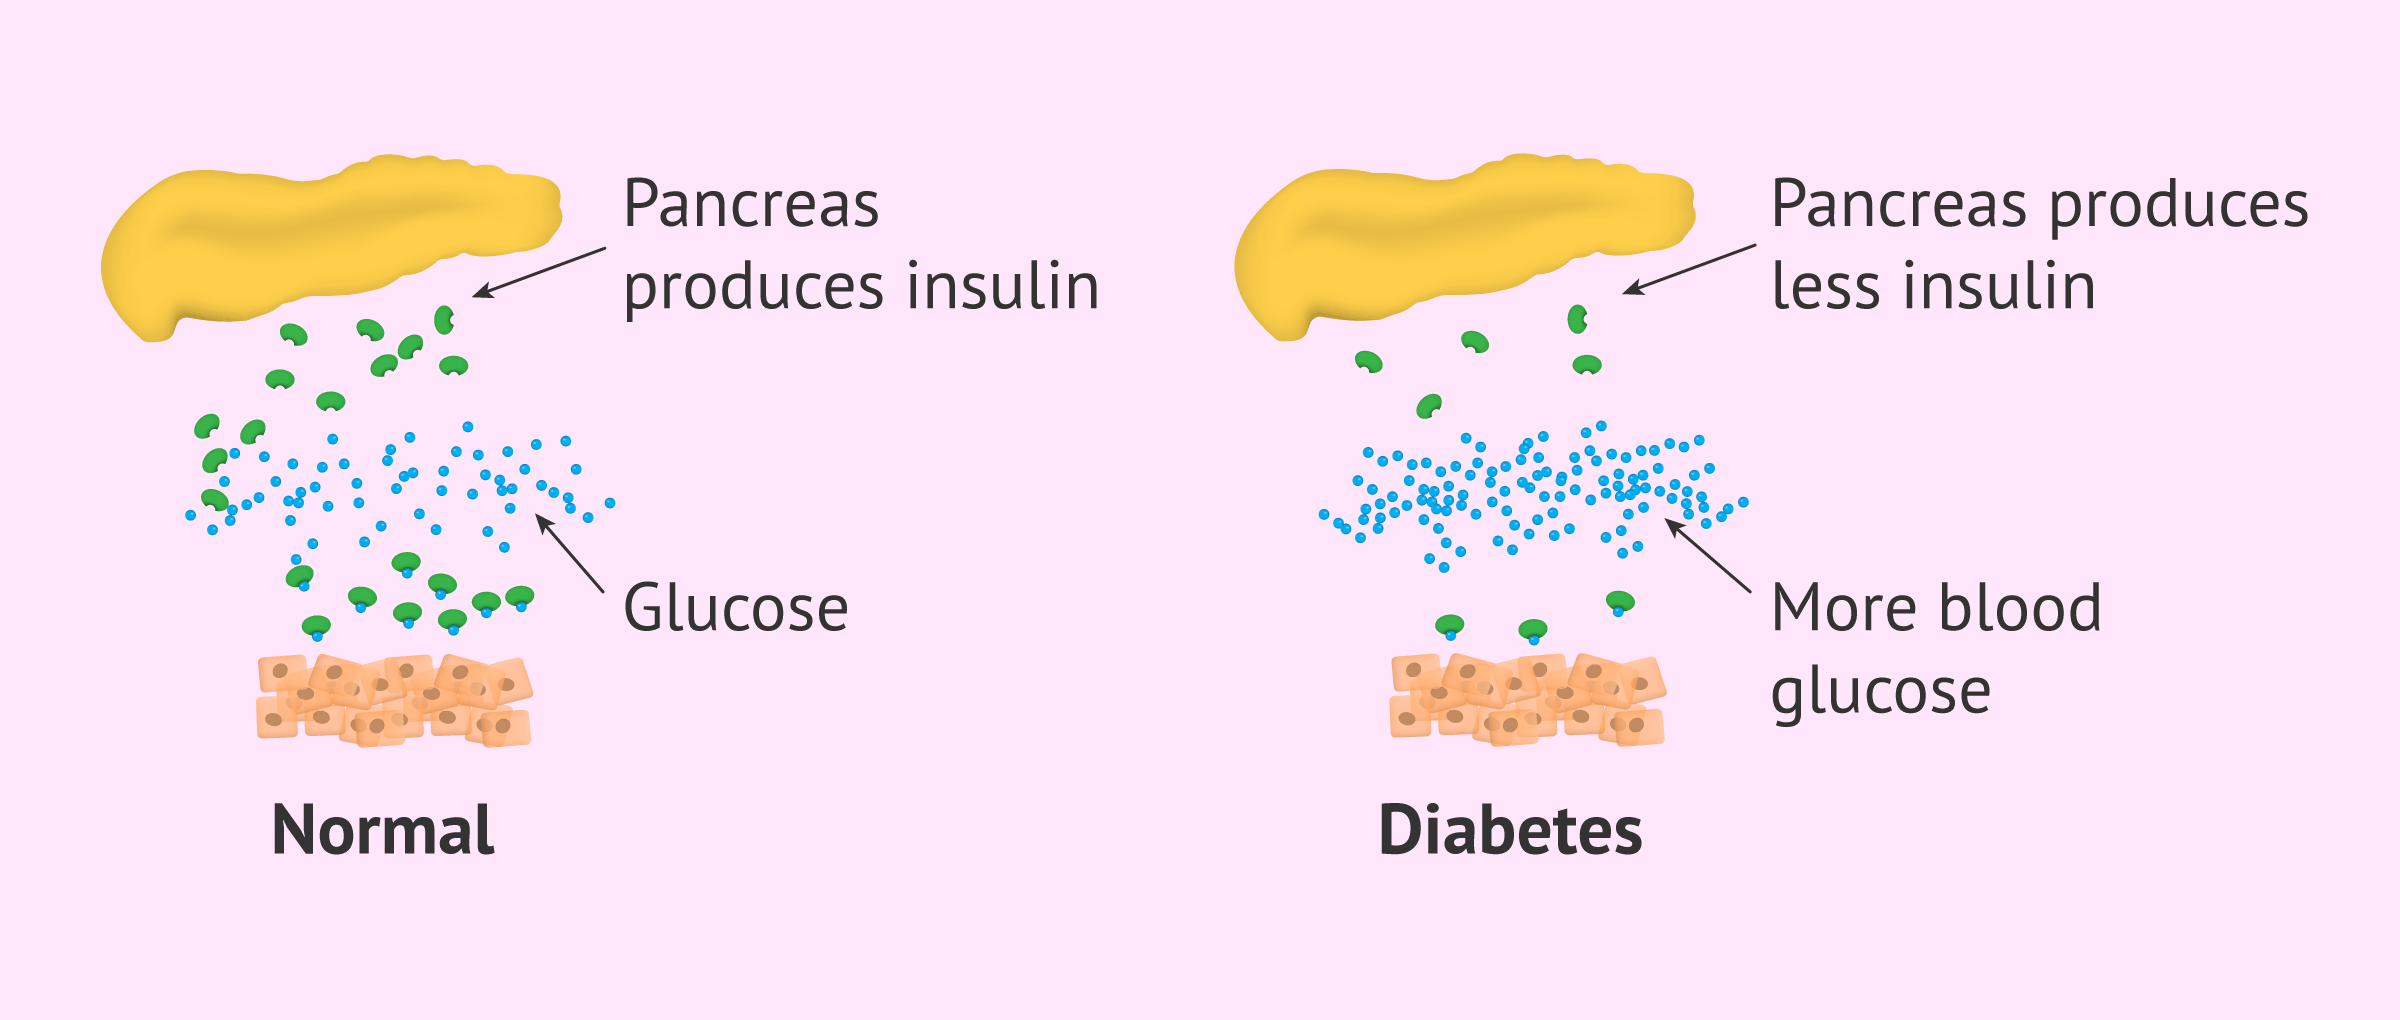 Why does diabetes occur?